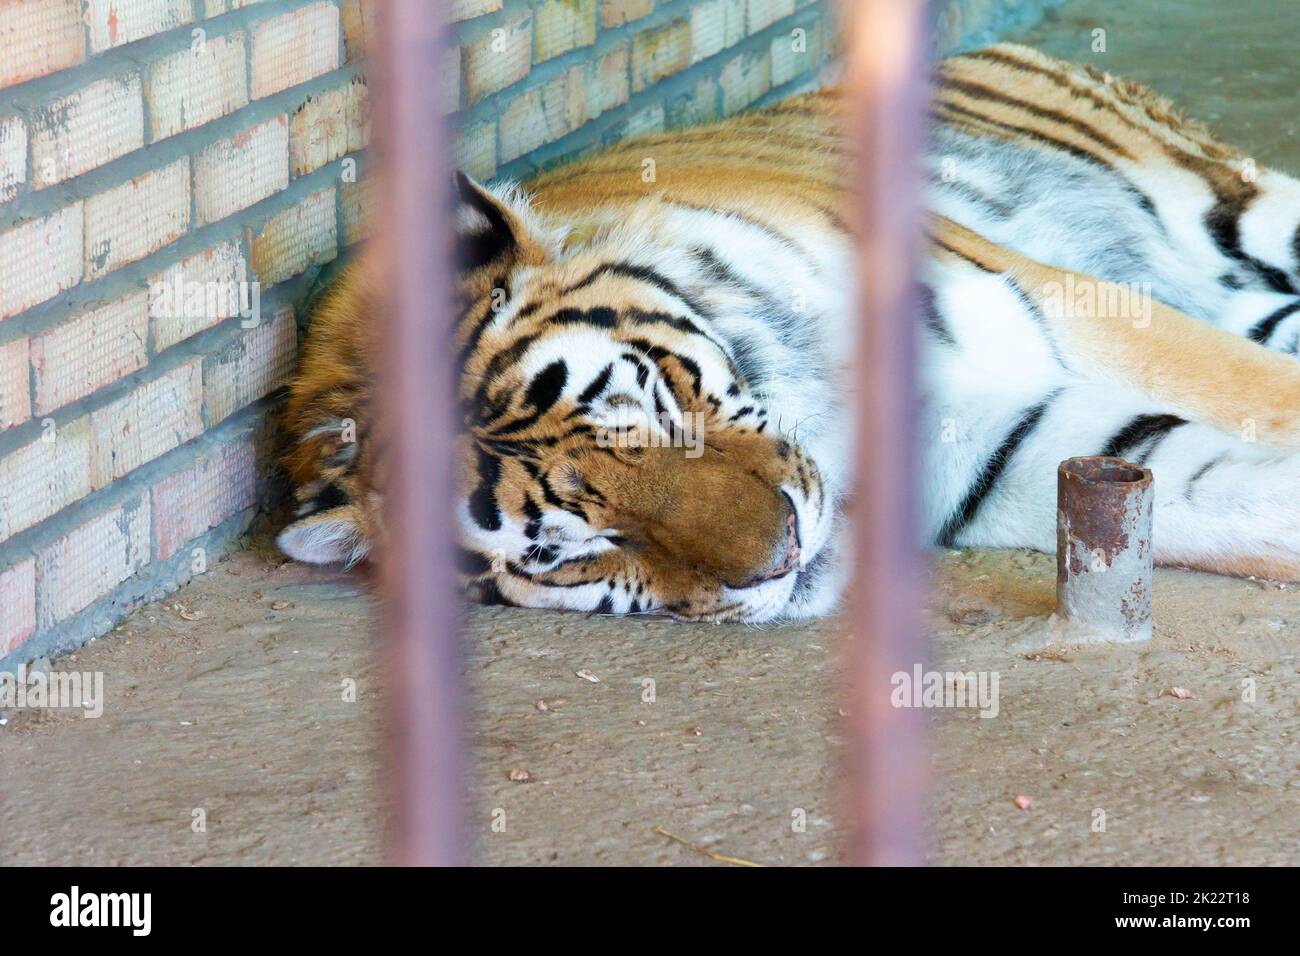 Tiger sleeping in a cage close-up. Wild cat in captivity. Animals in the zoo. Stock Photo